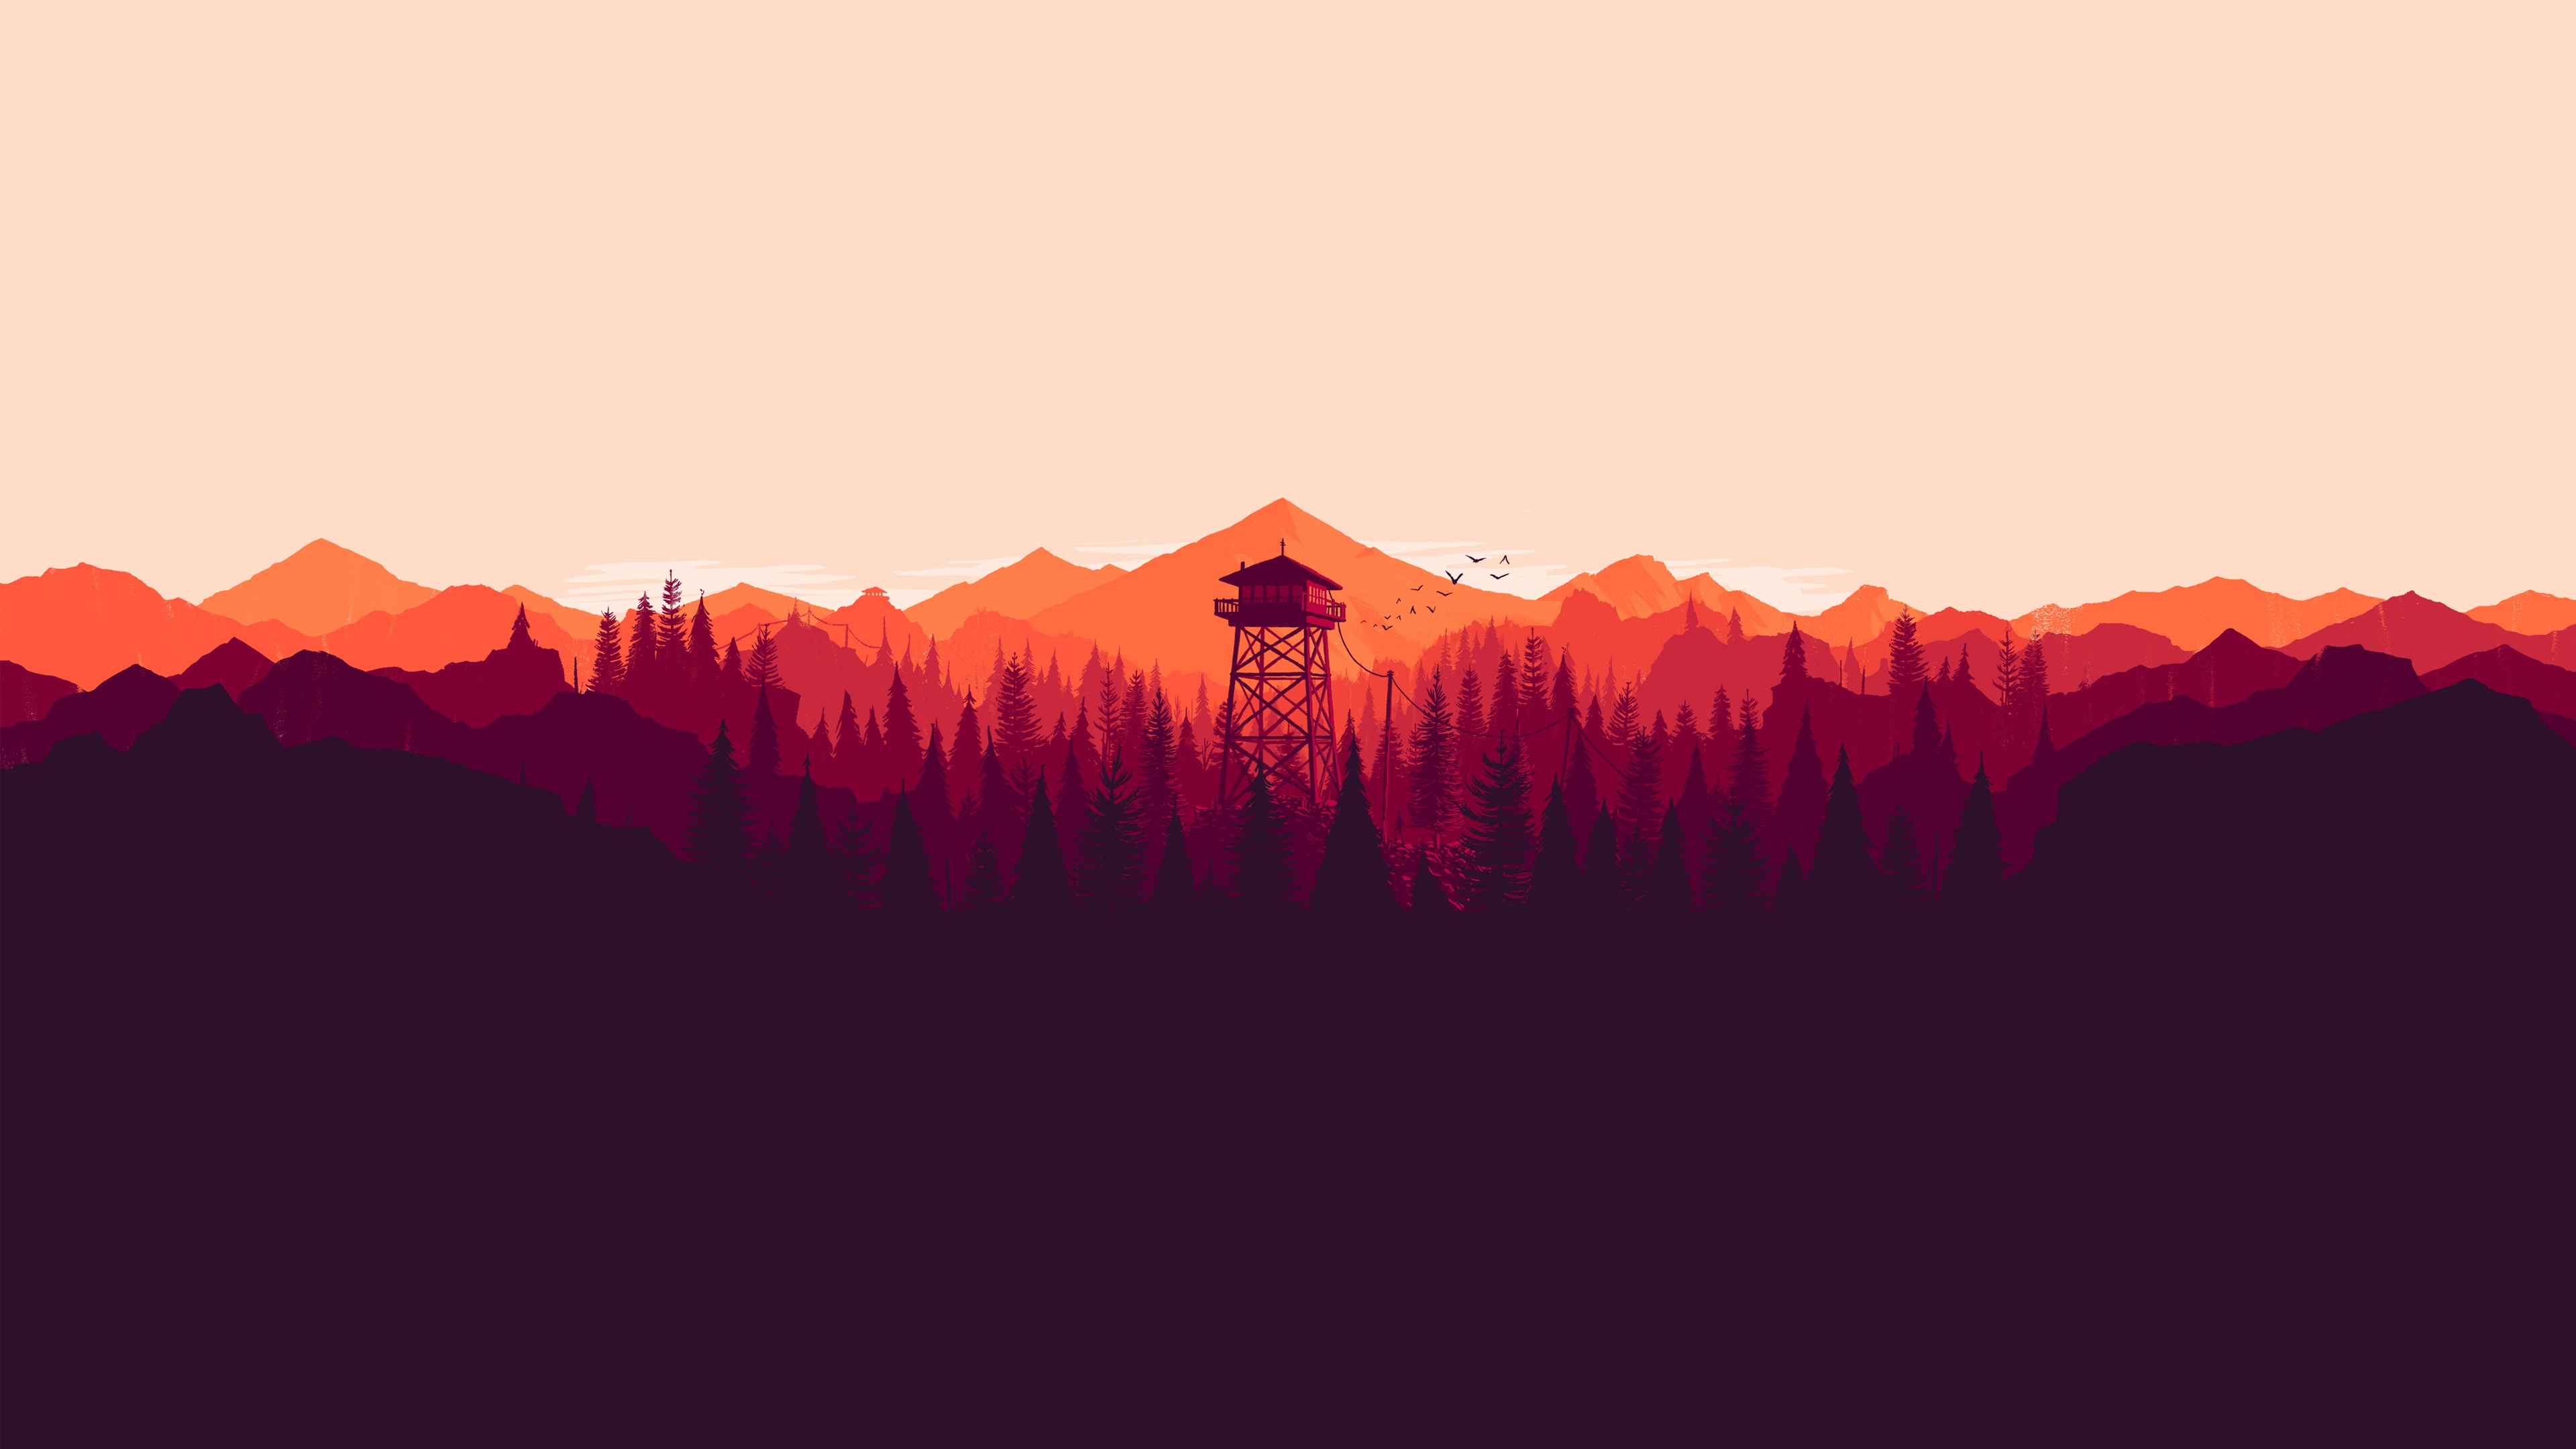 Firewatch Download Without License Key